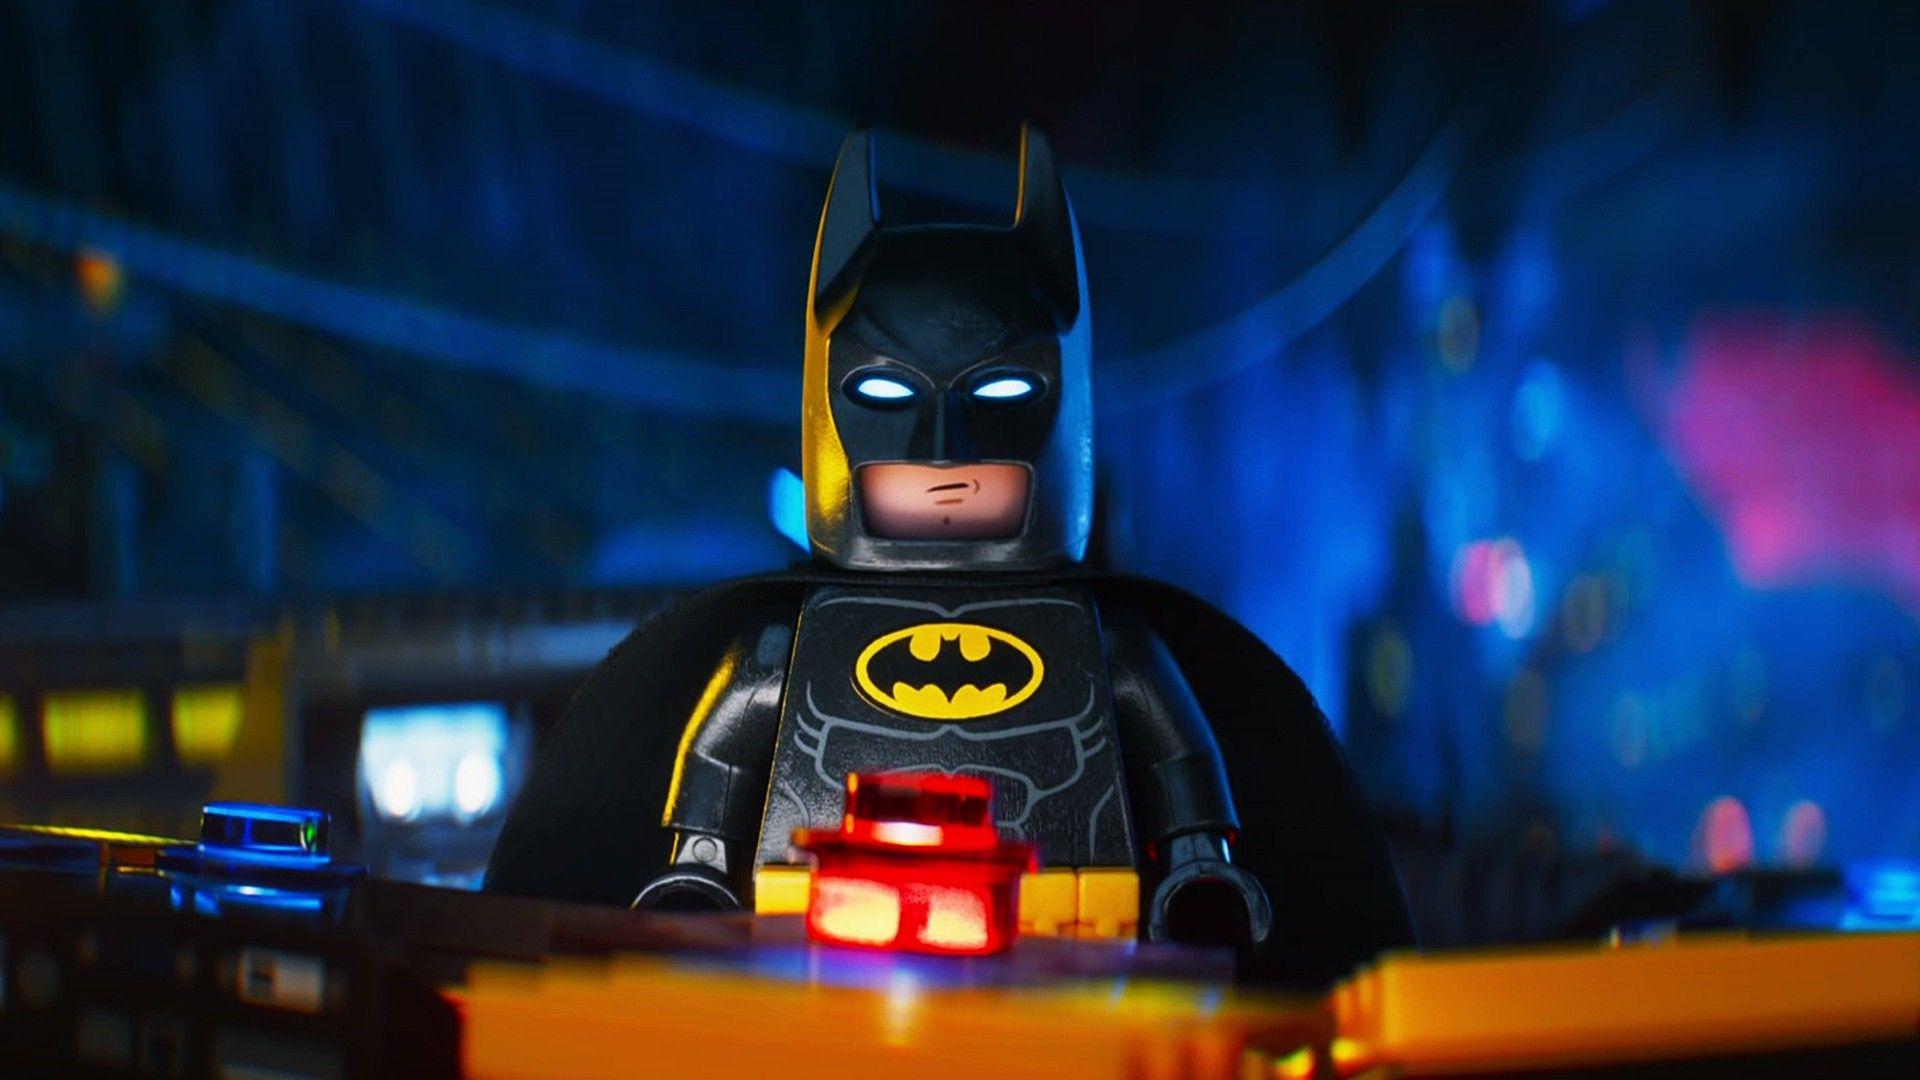 The Lego Batman Movie Full HD Wallpapers and Backgrounds Image.